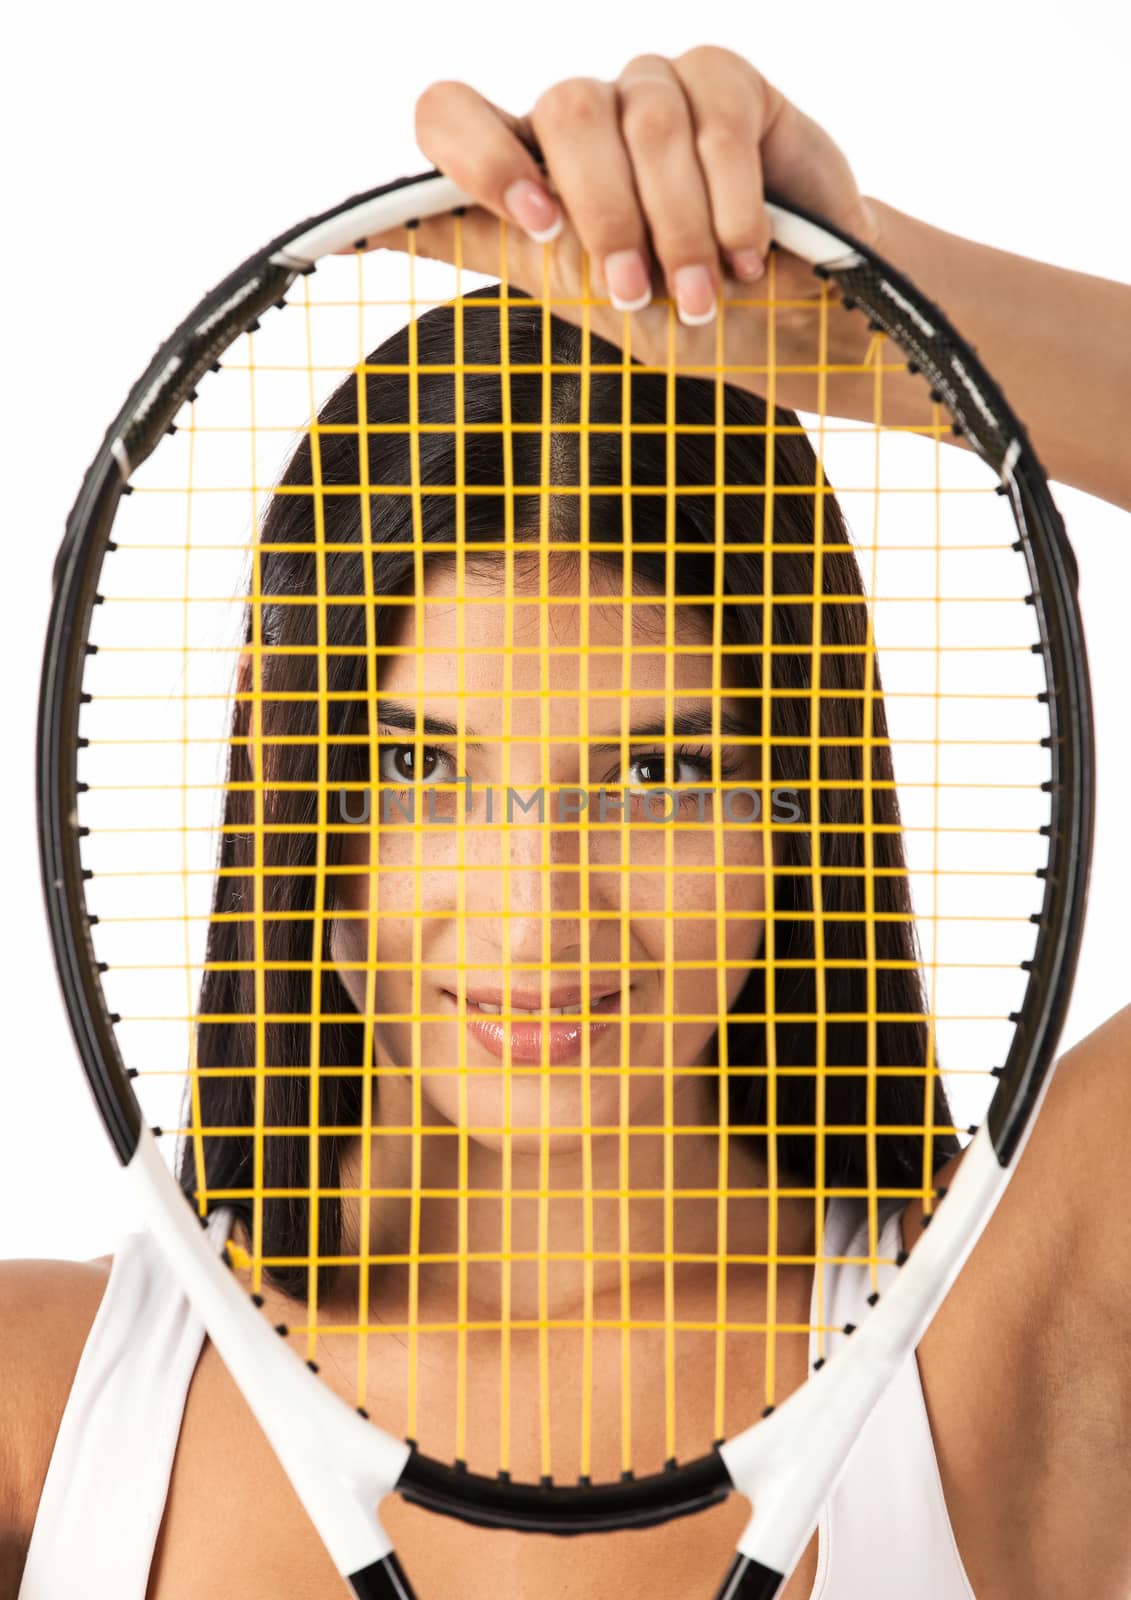 Young female tennis player looking through strings of racket over white